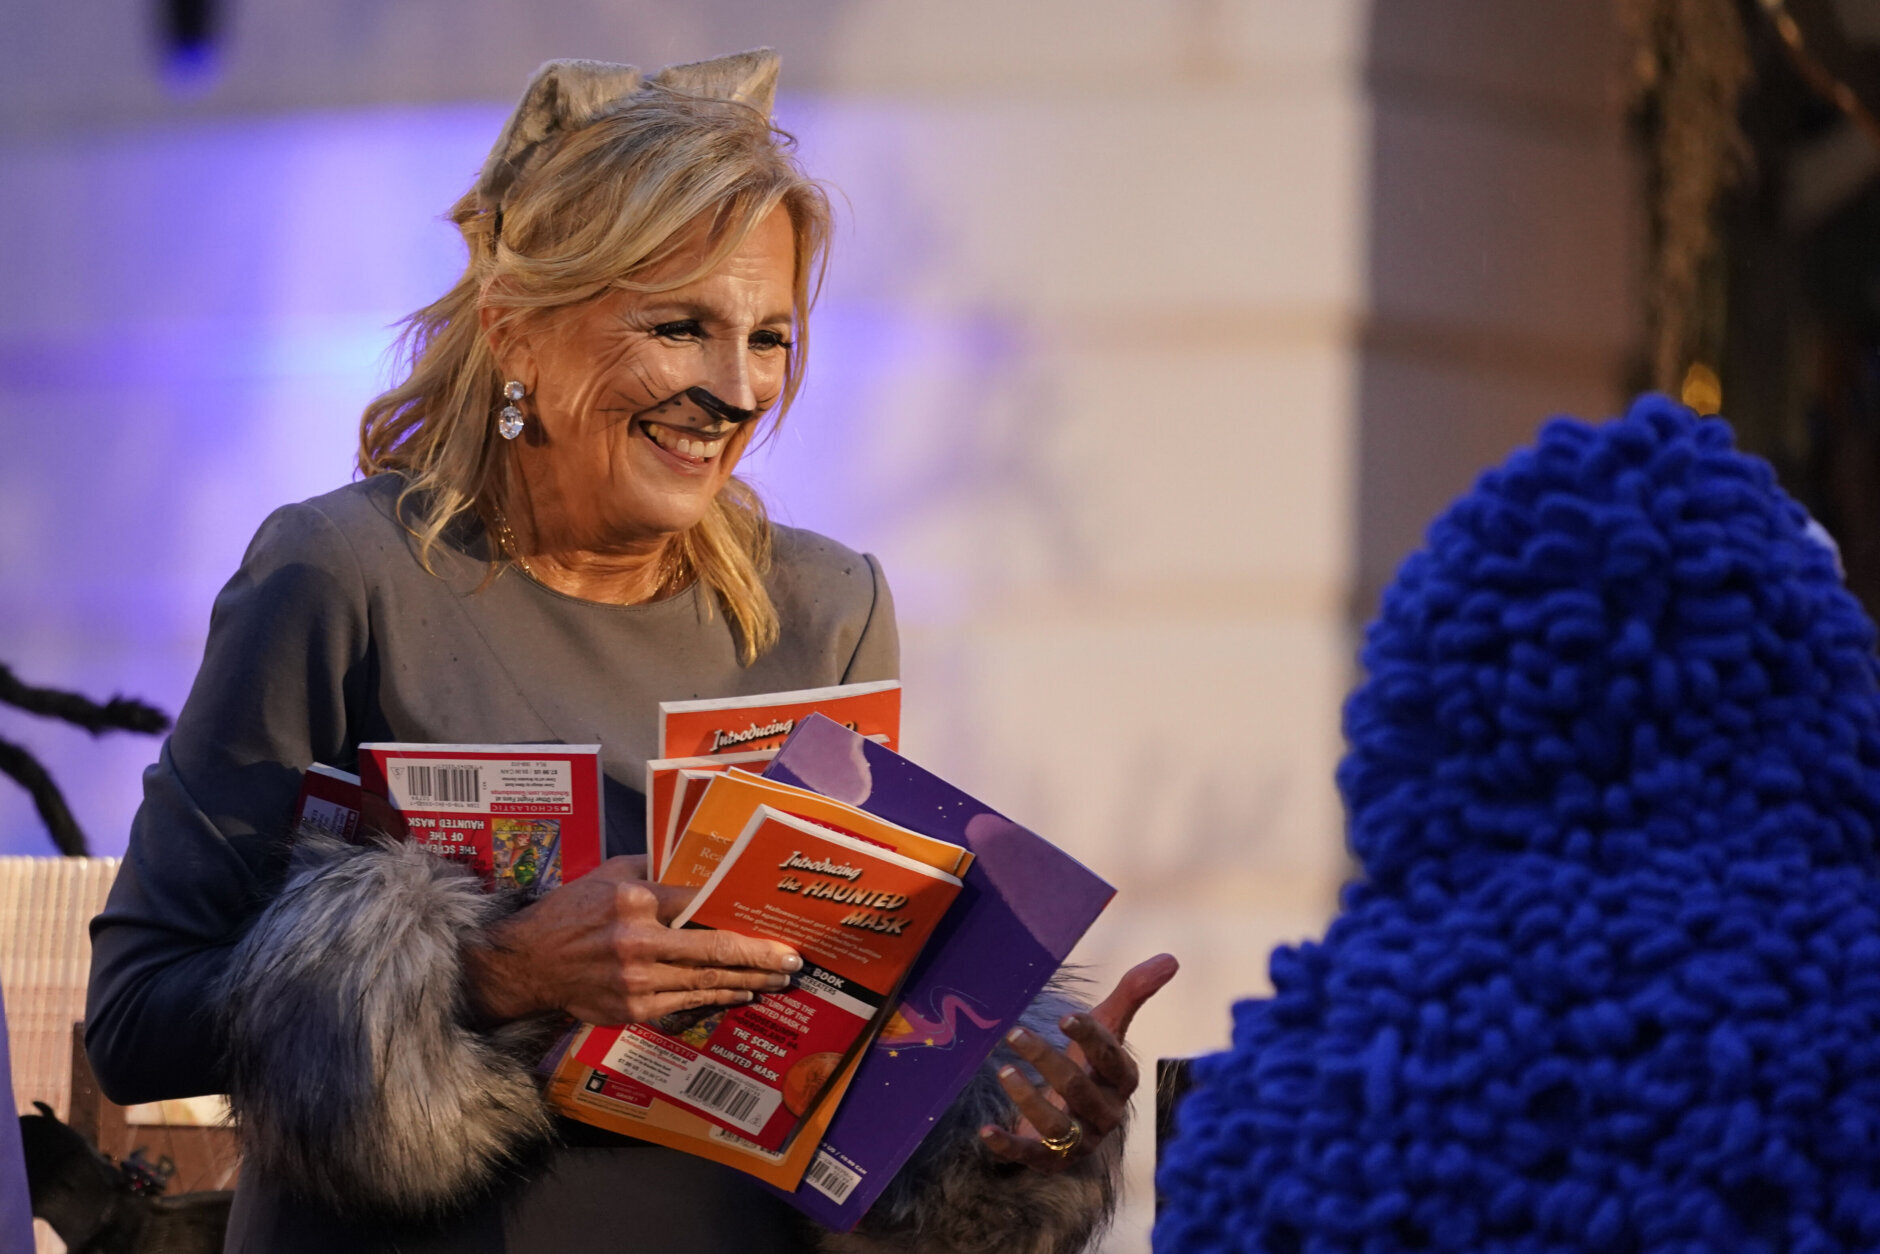 Arms full of books, First Lady Jill Biden greets trick-or-treaters